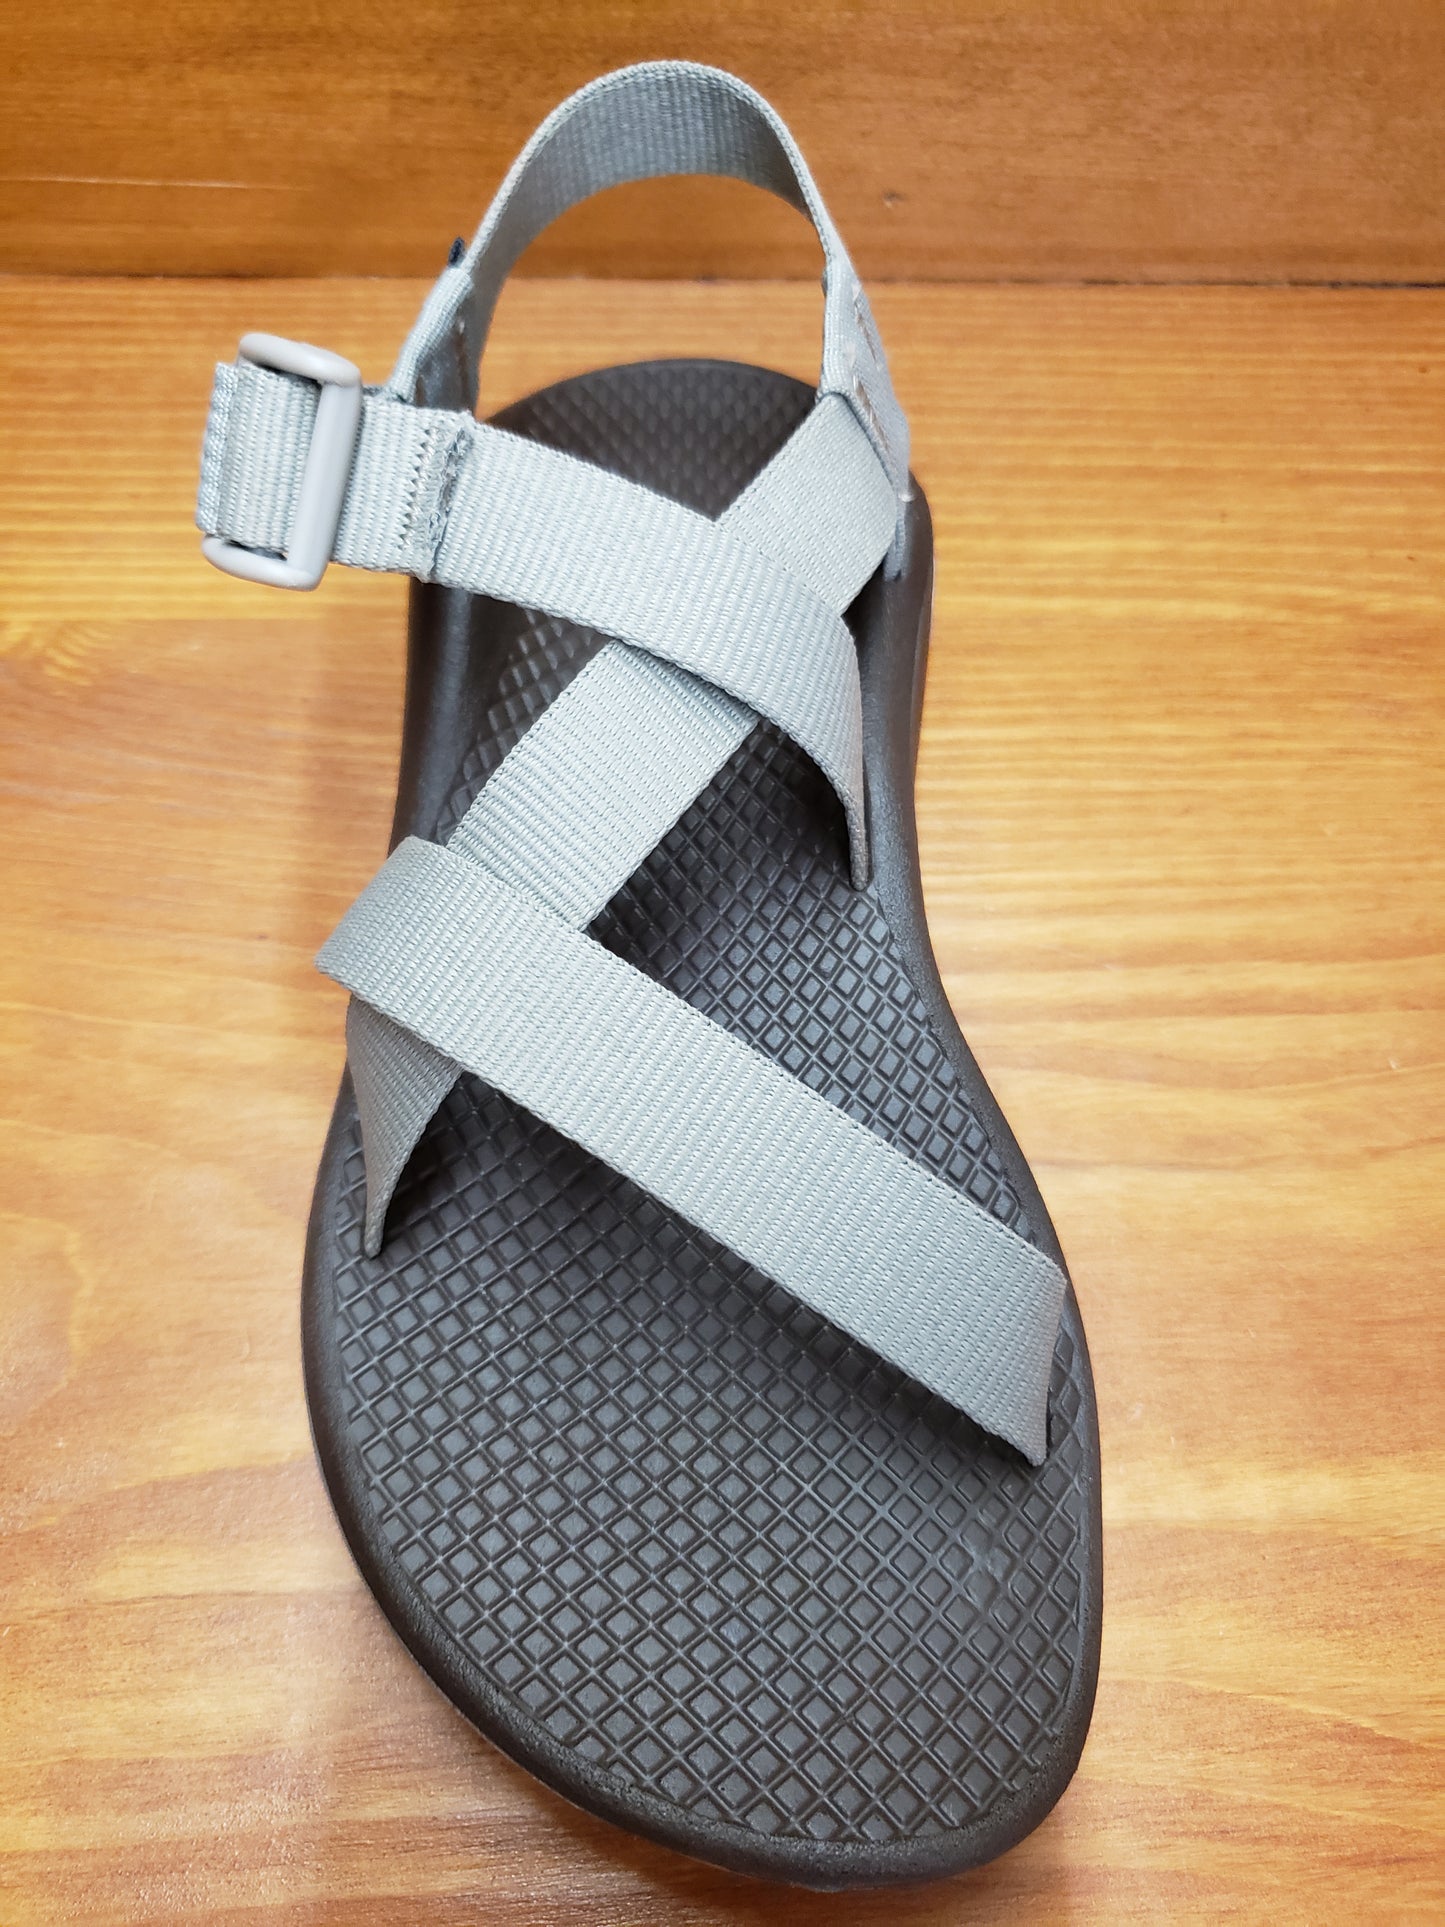 Chaco ZCloud Solid Moon Rock JCH108018